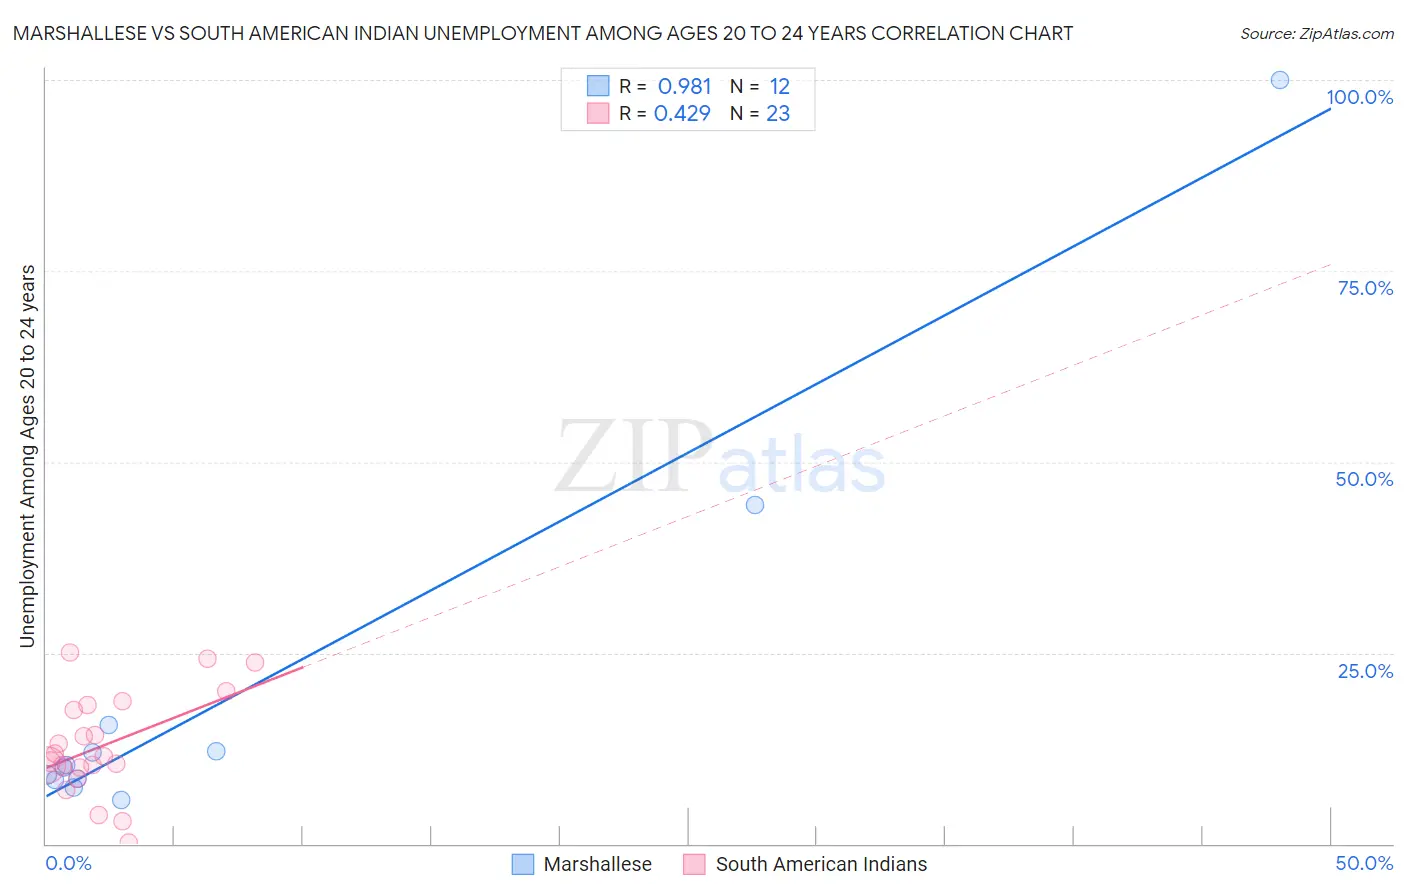 Marshallese vs South American Indian Unemployment Among Ages 20 to 24 years